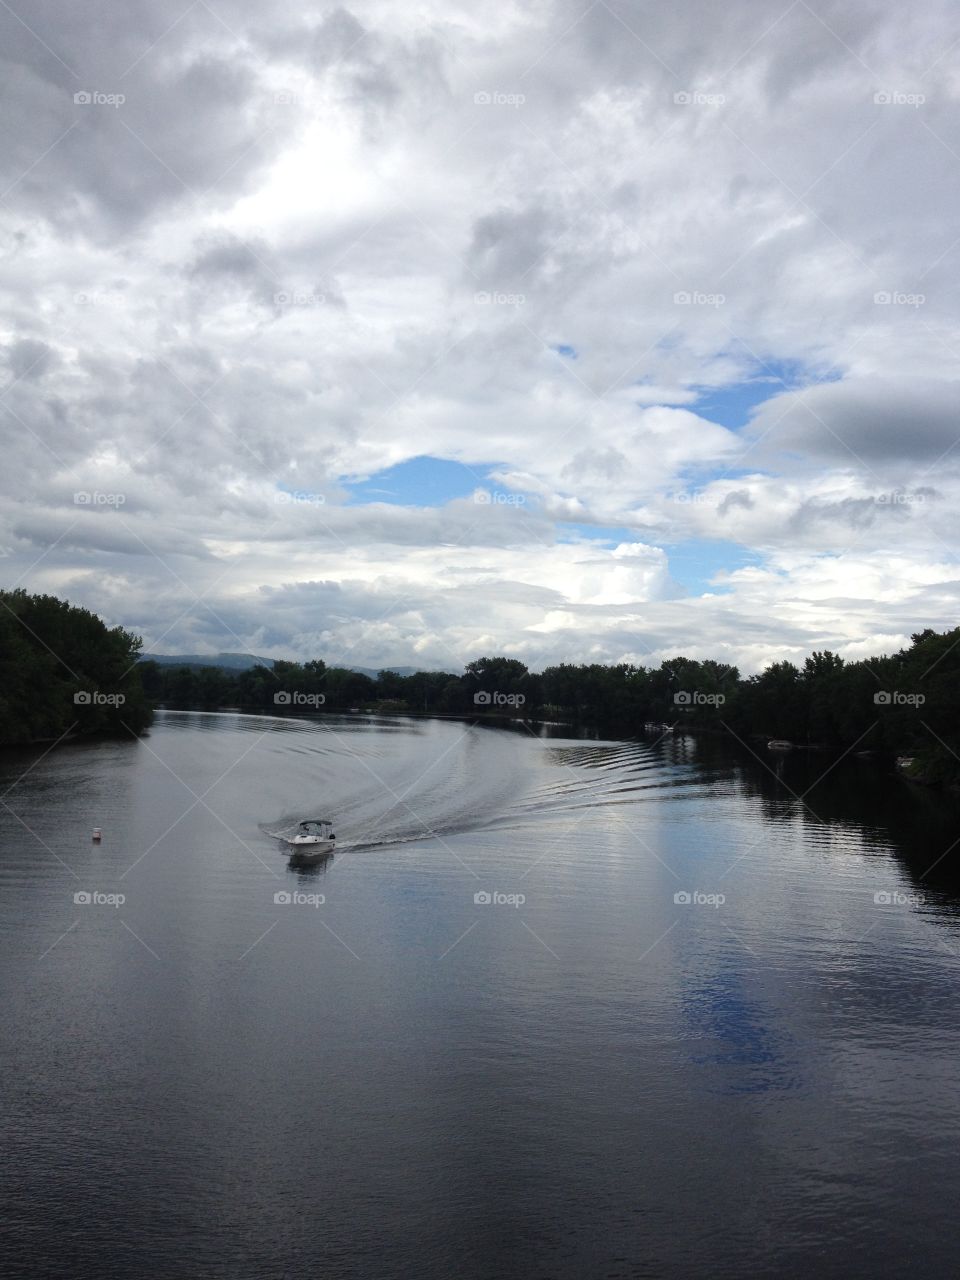 Cloudy summer day on the Connecticut Rivern